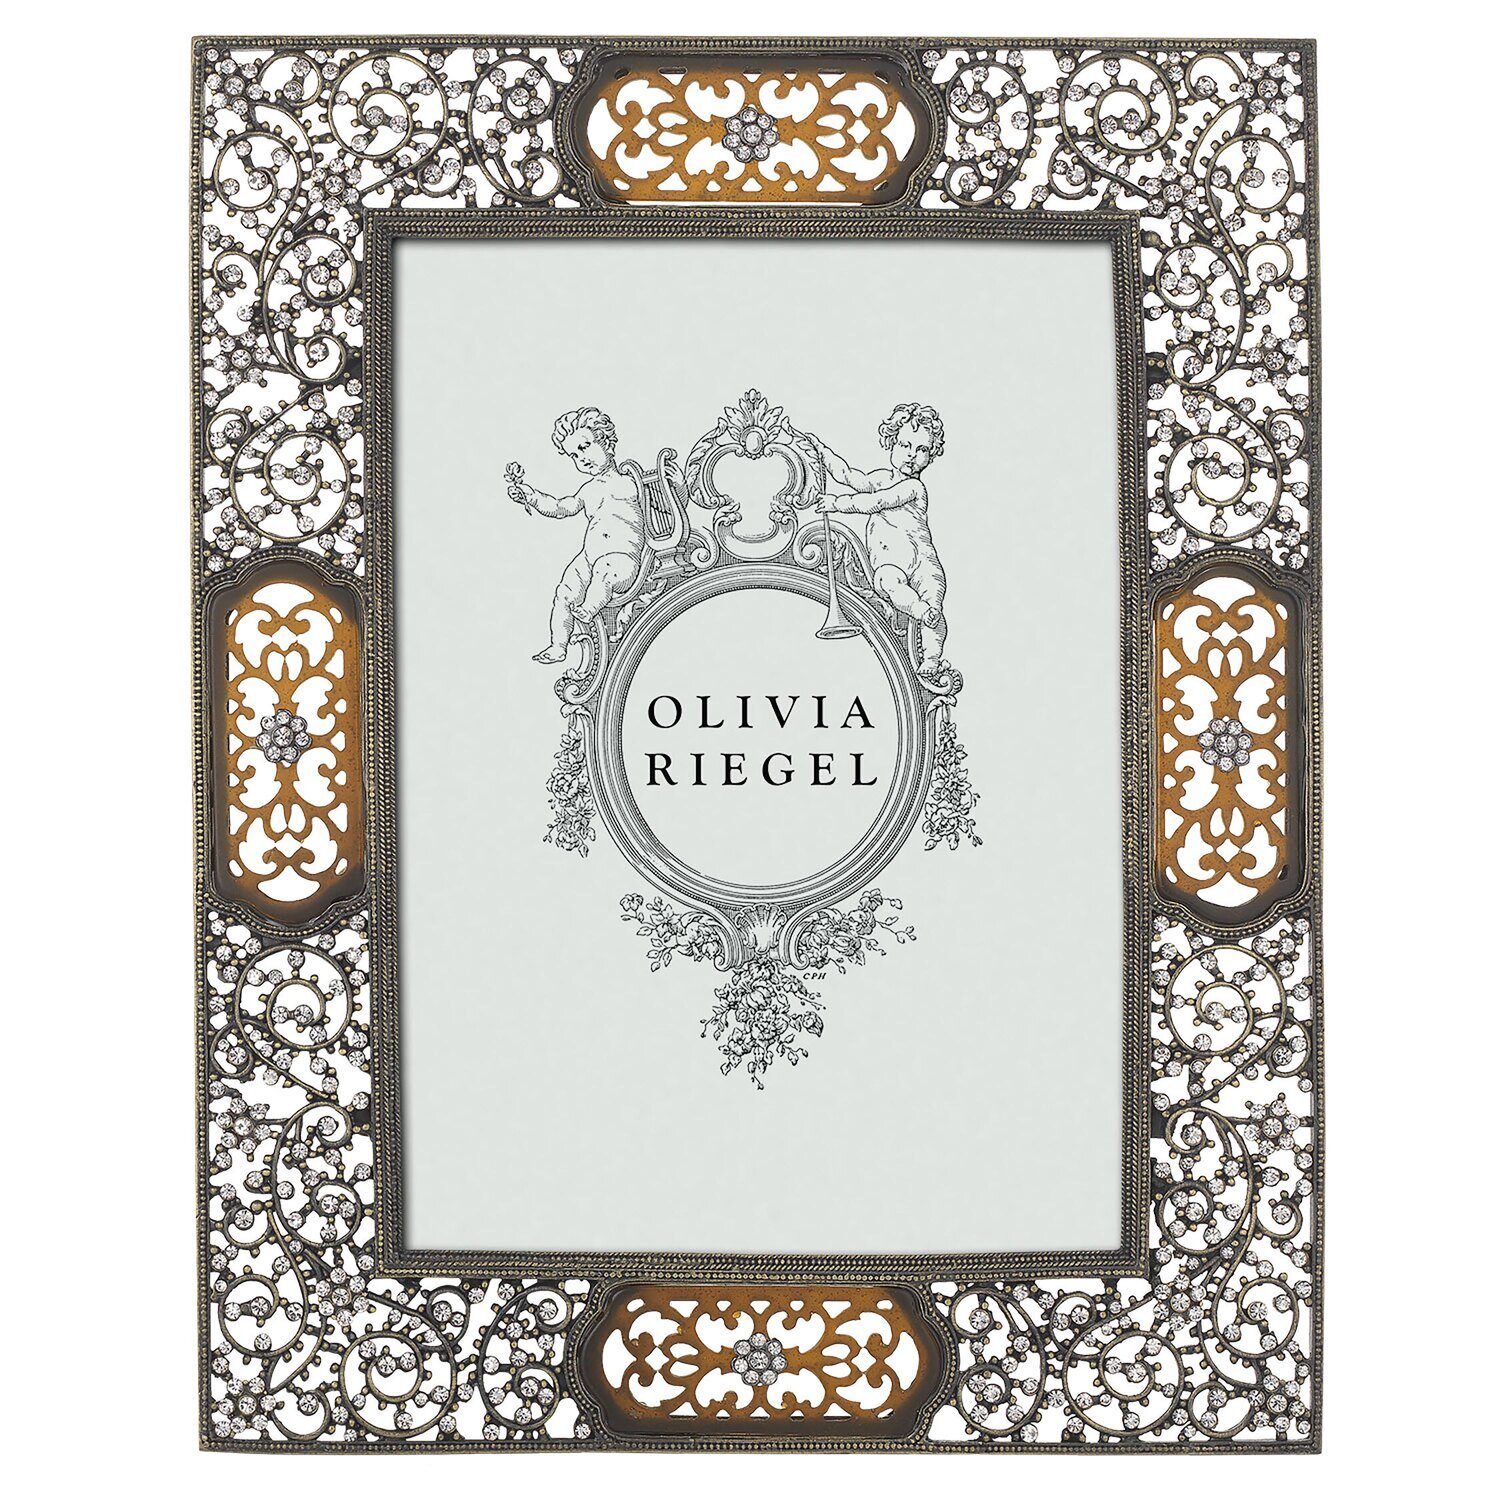 Olivia Riegel Bronze Queen Anne's Lace 5 x 7 Inch Picture Frame RT0097